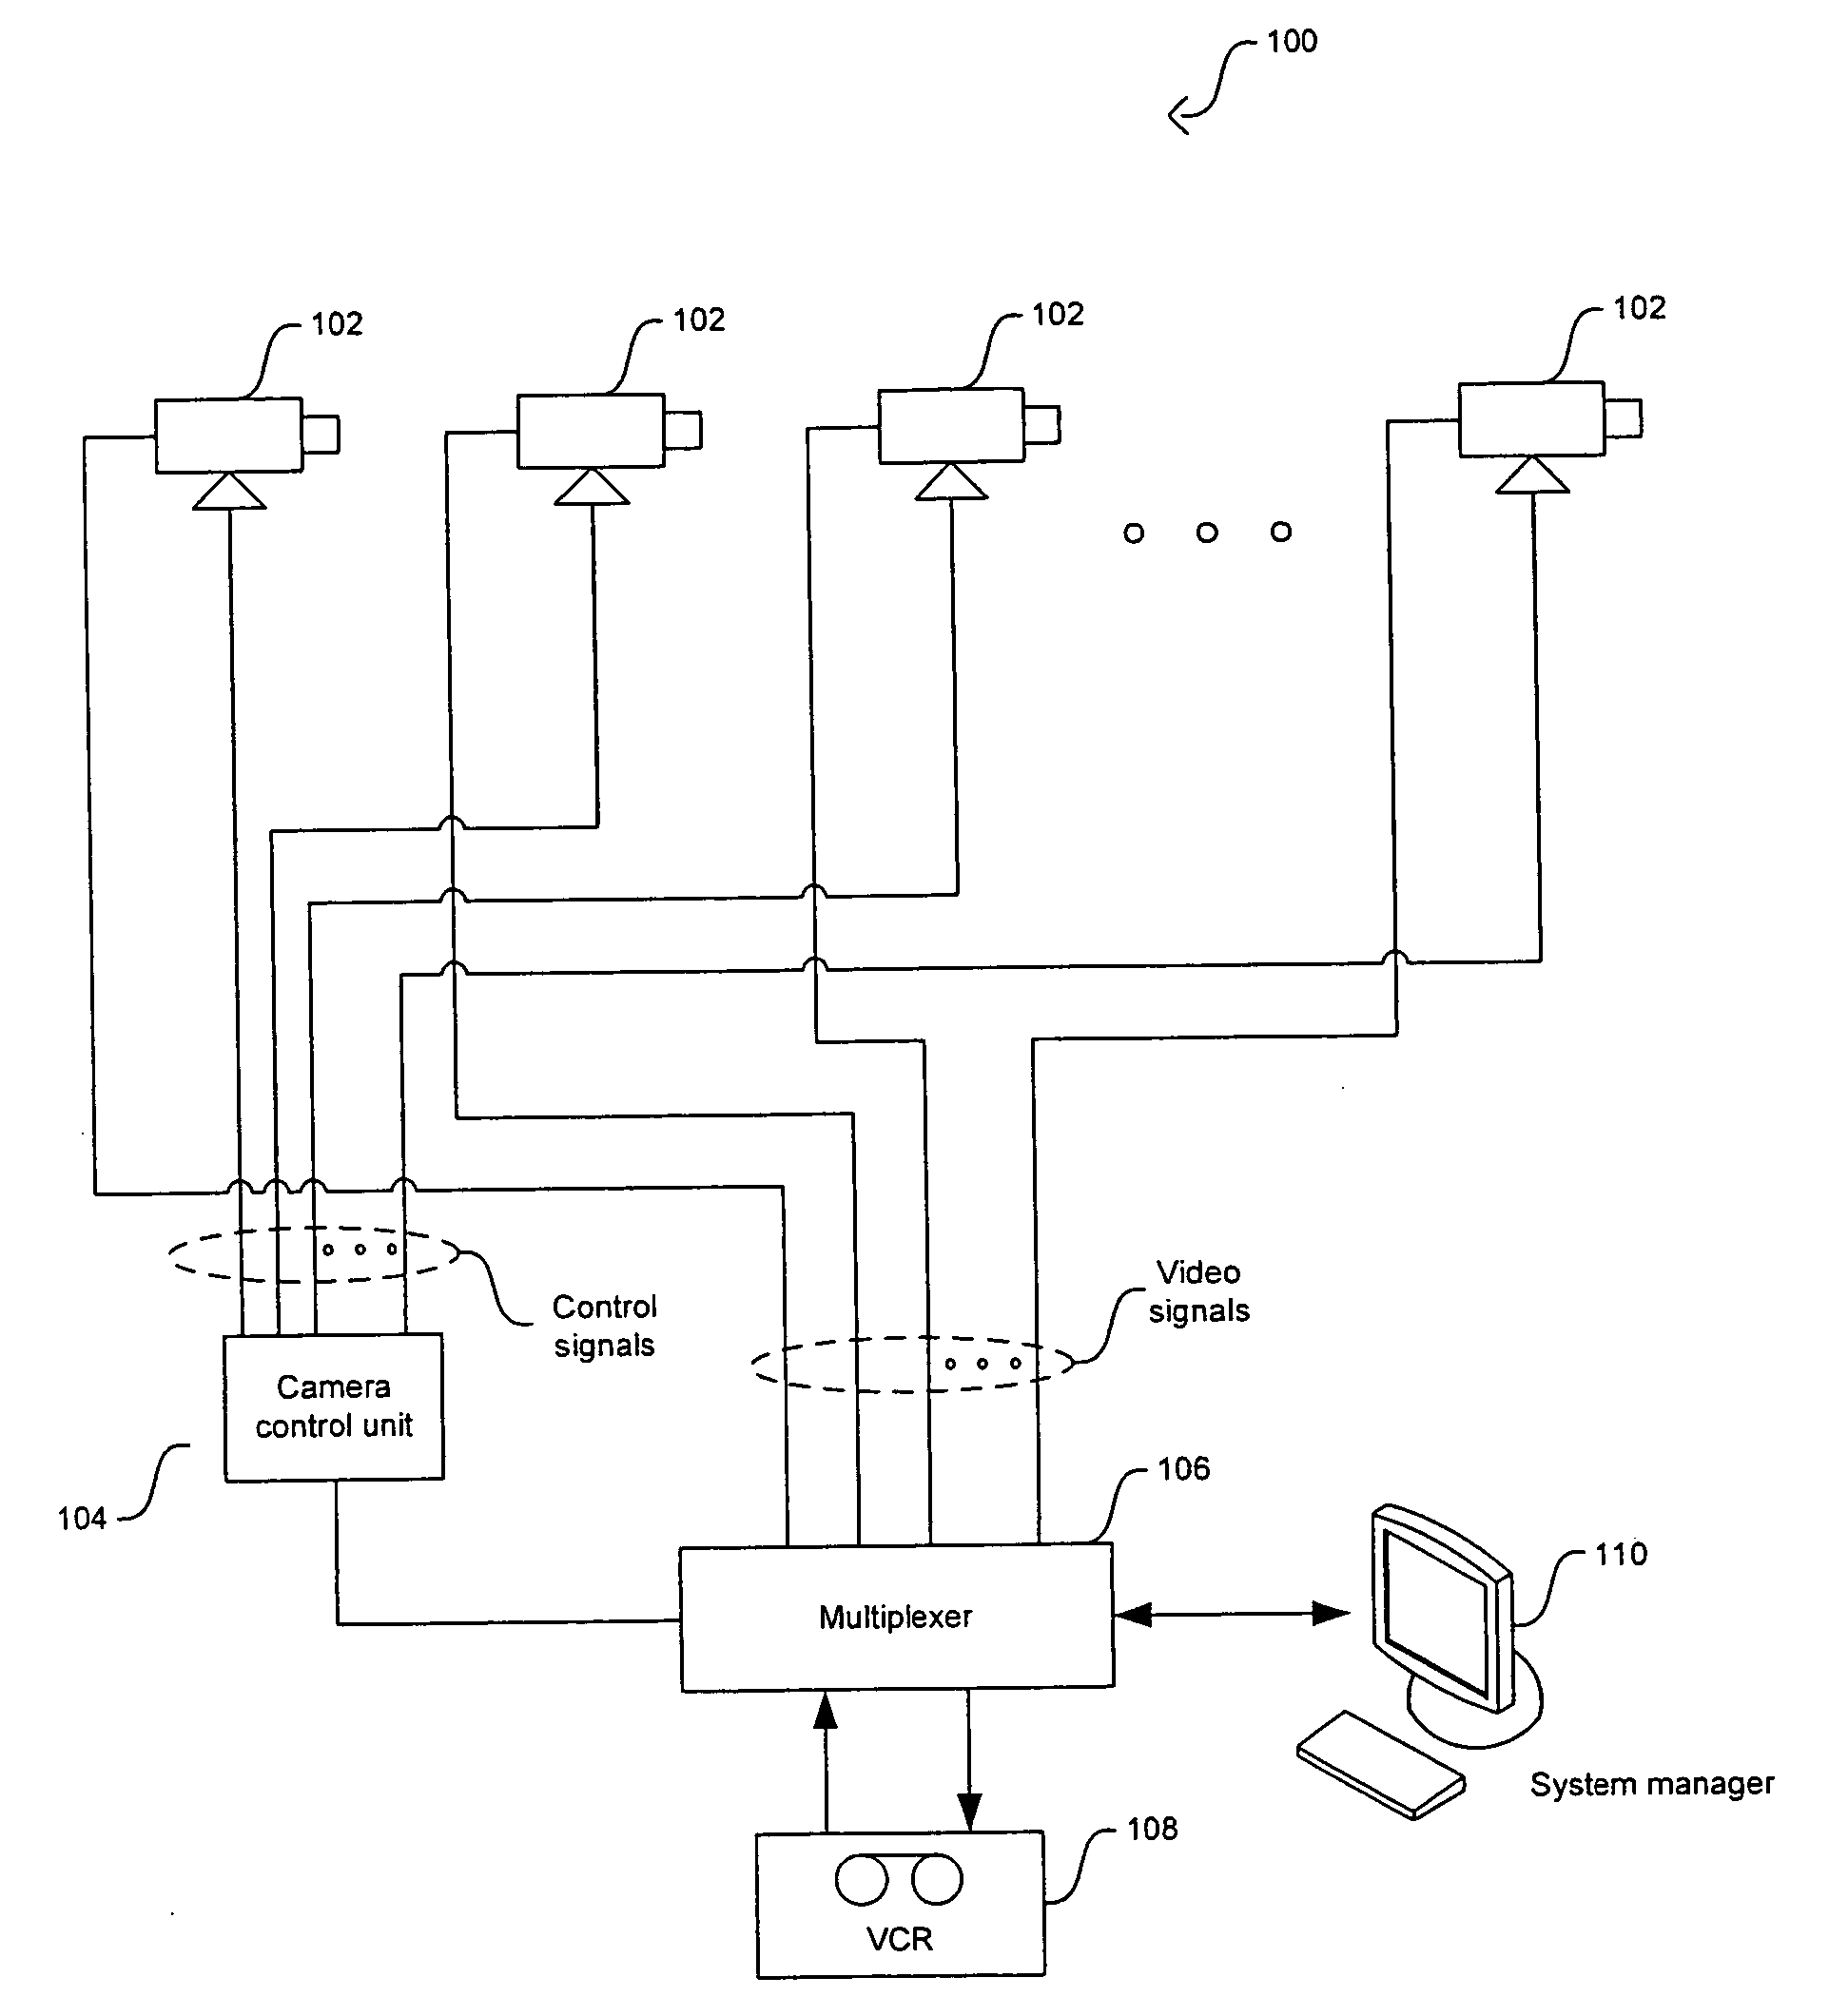 Method and system for configurable security and surveillance systems